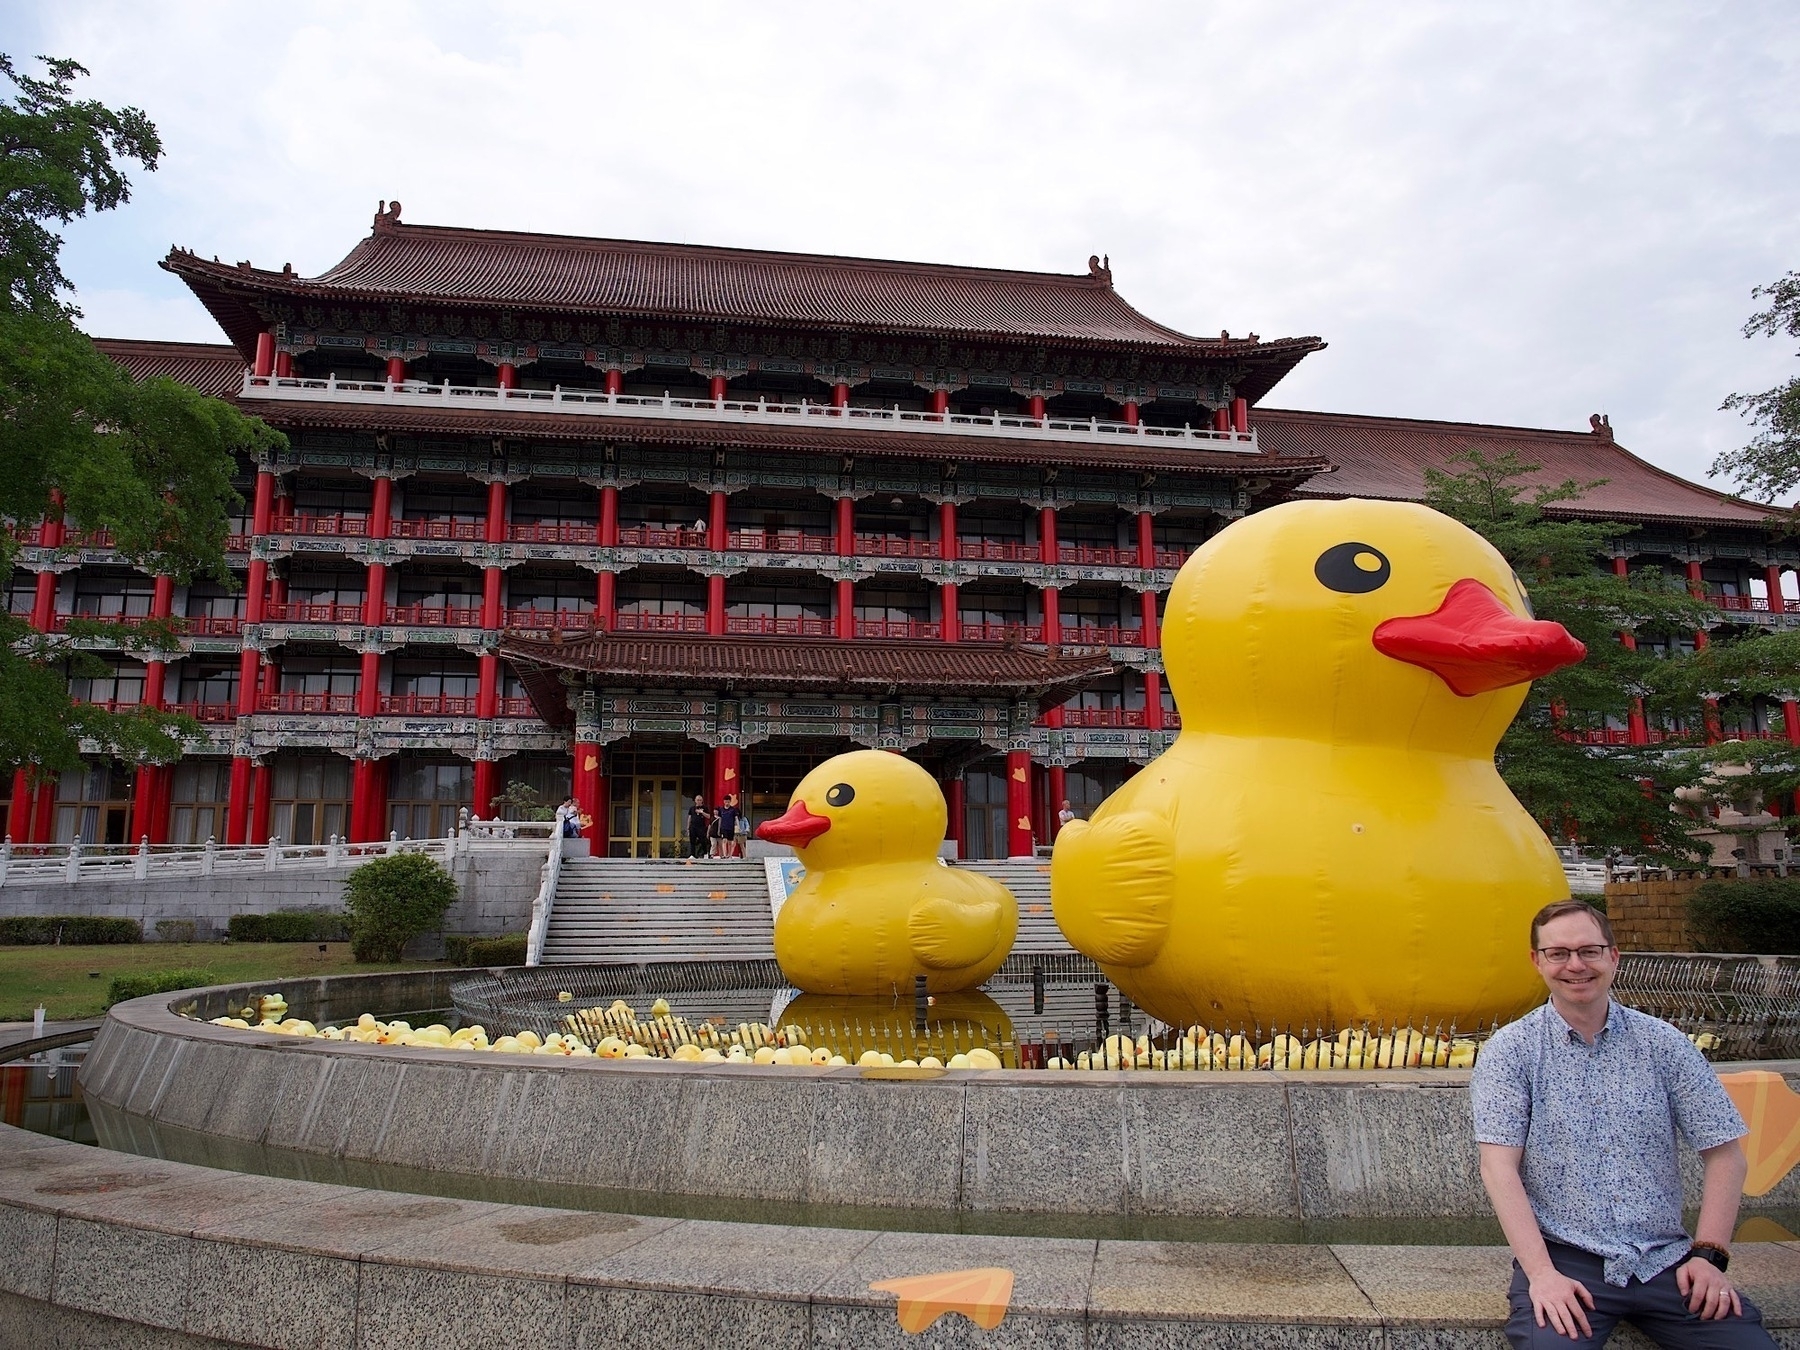 Chad sits in front of the fountain of the Grand Kaohsiung Hotel. In the fountain is a giant yellow rubber ducky